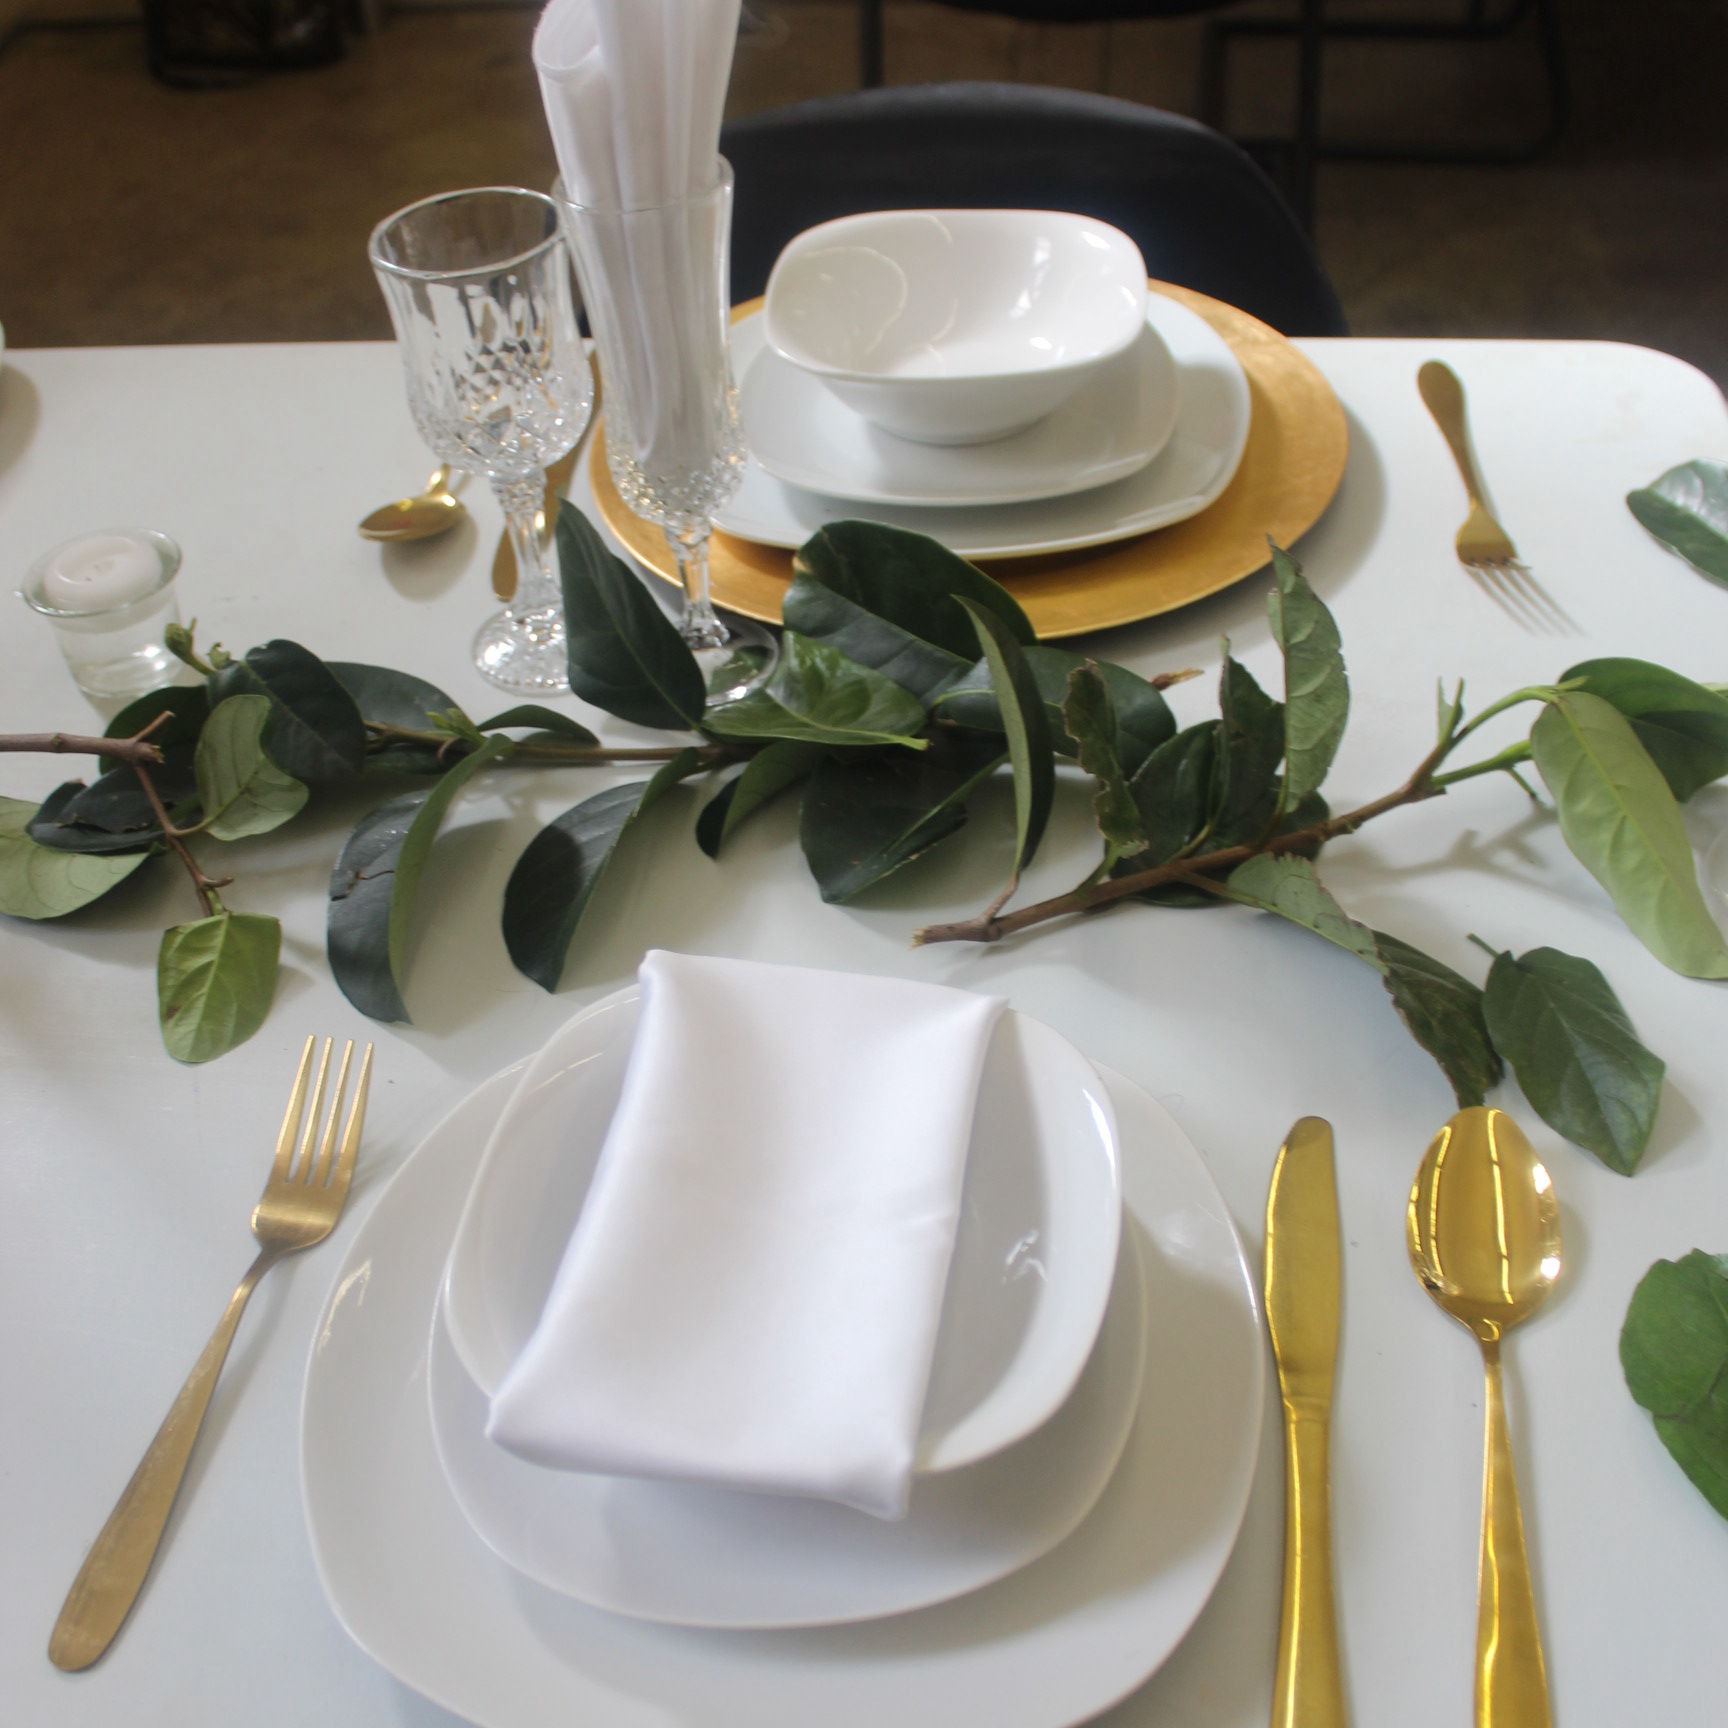 One of the place settings done for the Outreach Foundation Décor class